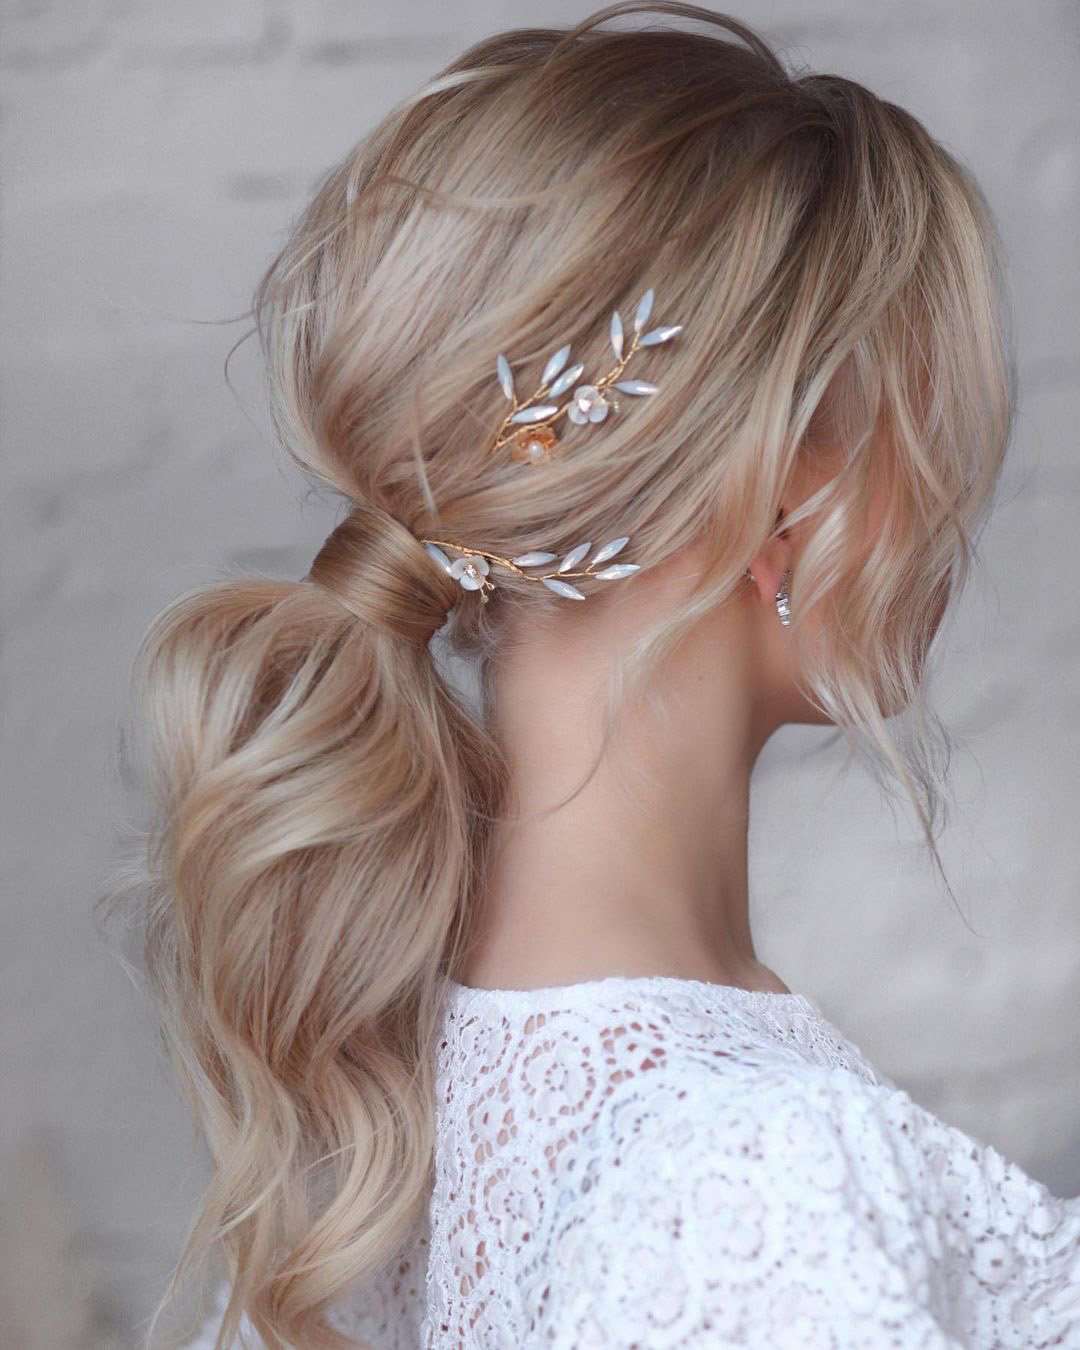 pony tail hairstyles ideas for wedding low with ary curls hair_vera